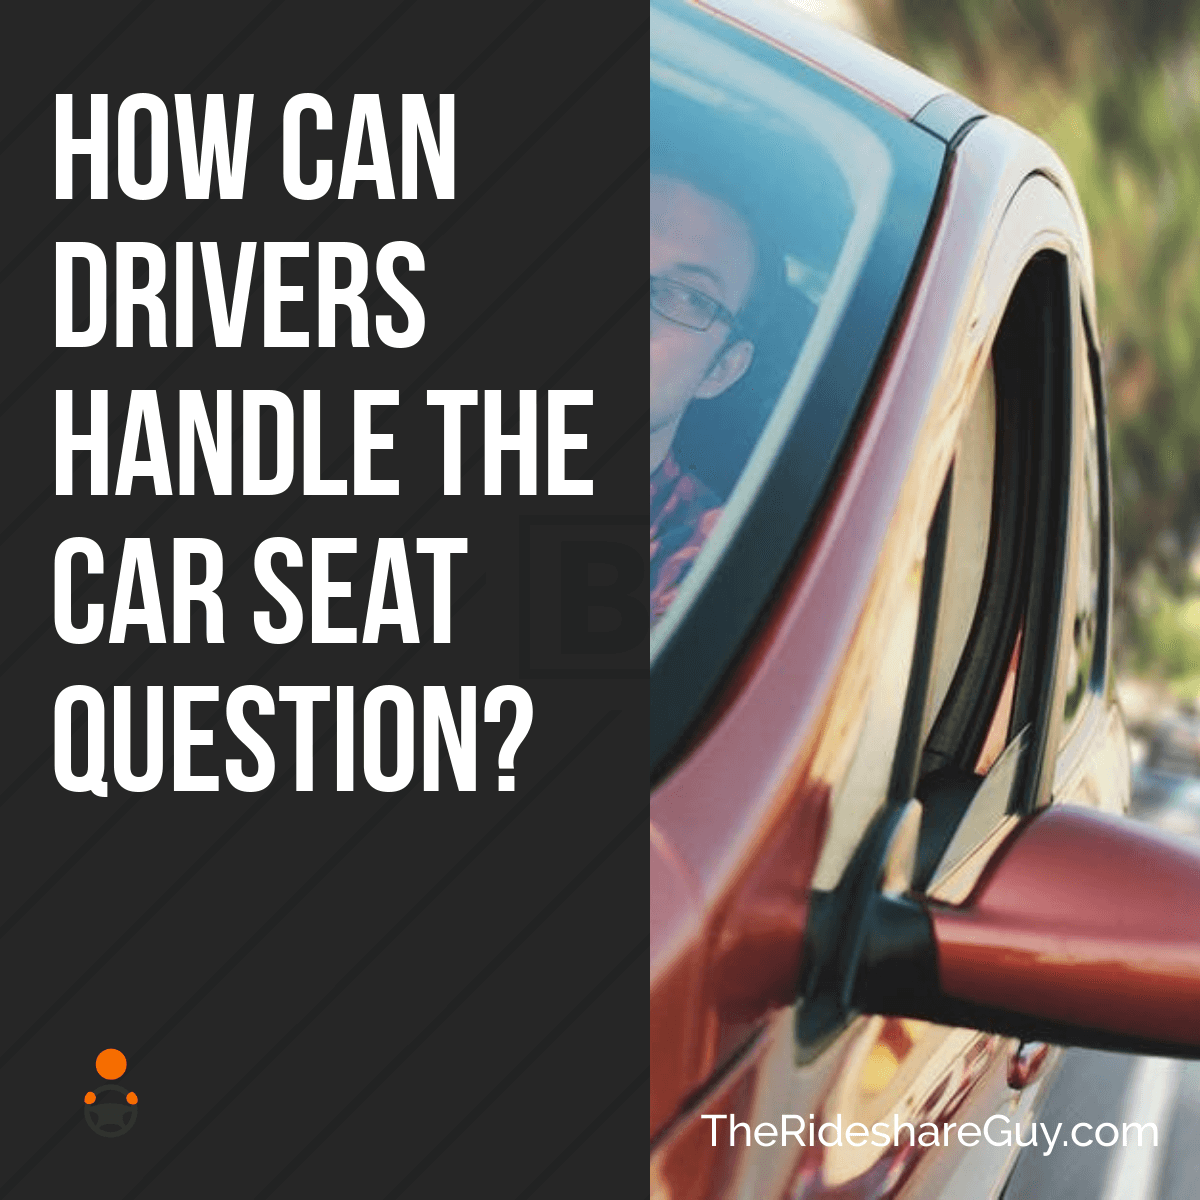 How can drivers handle the car seat questions? #Uber #Lyft